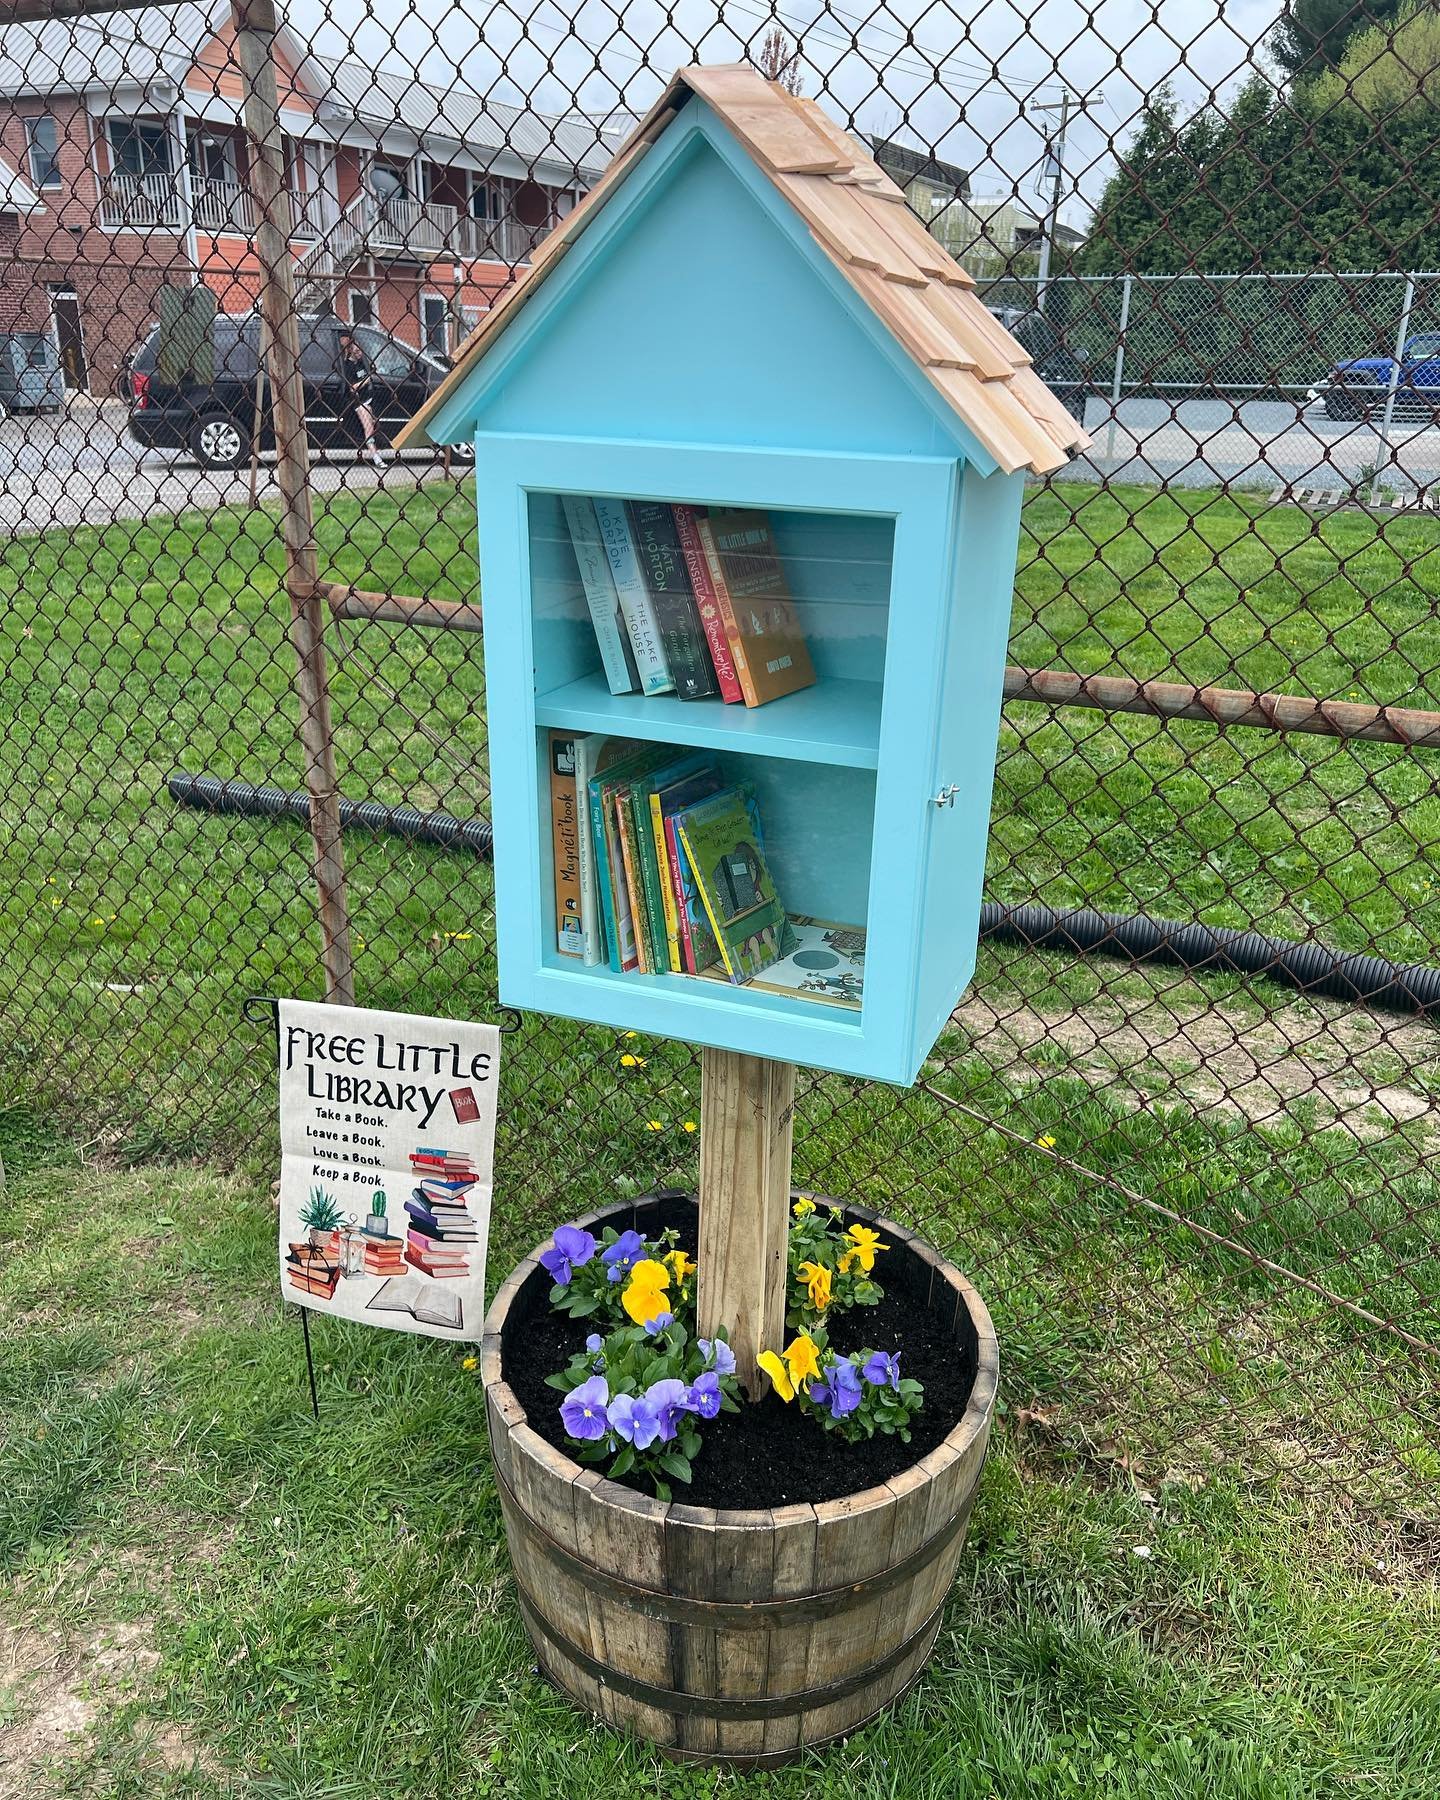 Next time you get a snowball, check out our new free little library! Take a book and/or leave a book! 📚